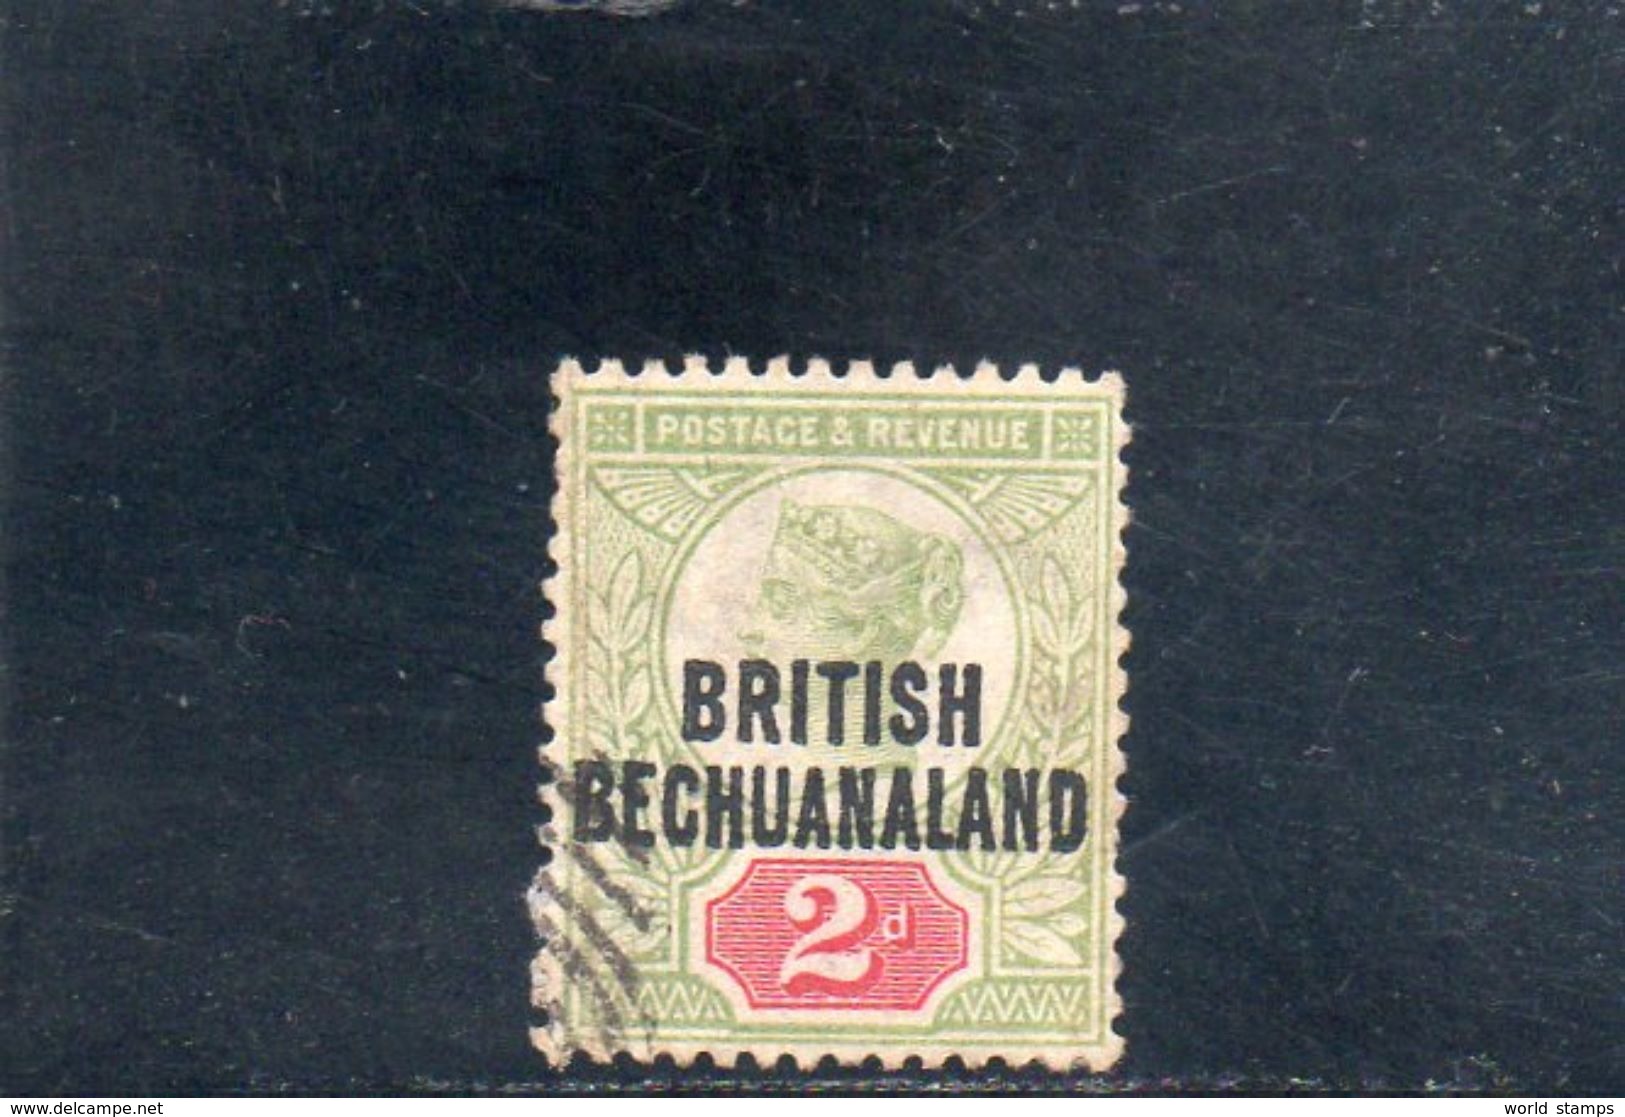 BECHUANALAND 1892 O - 1885-1895 Crown Colony